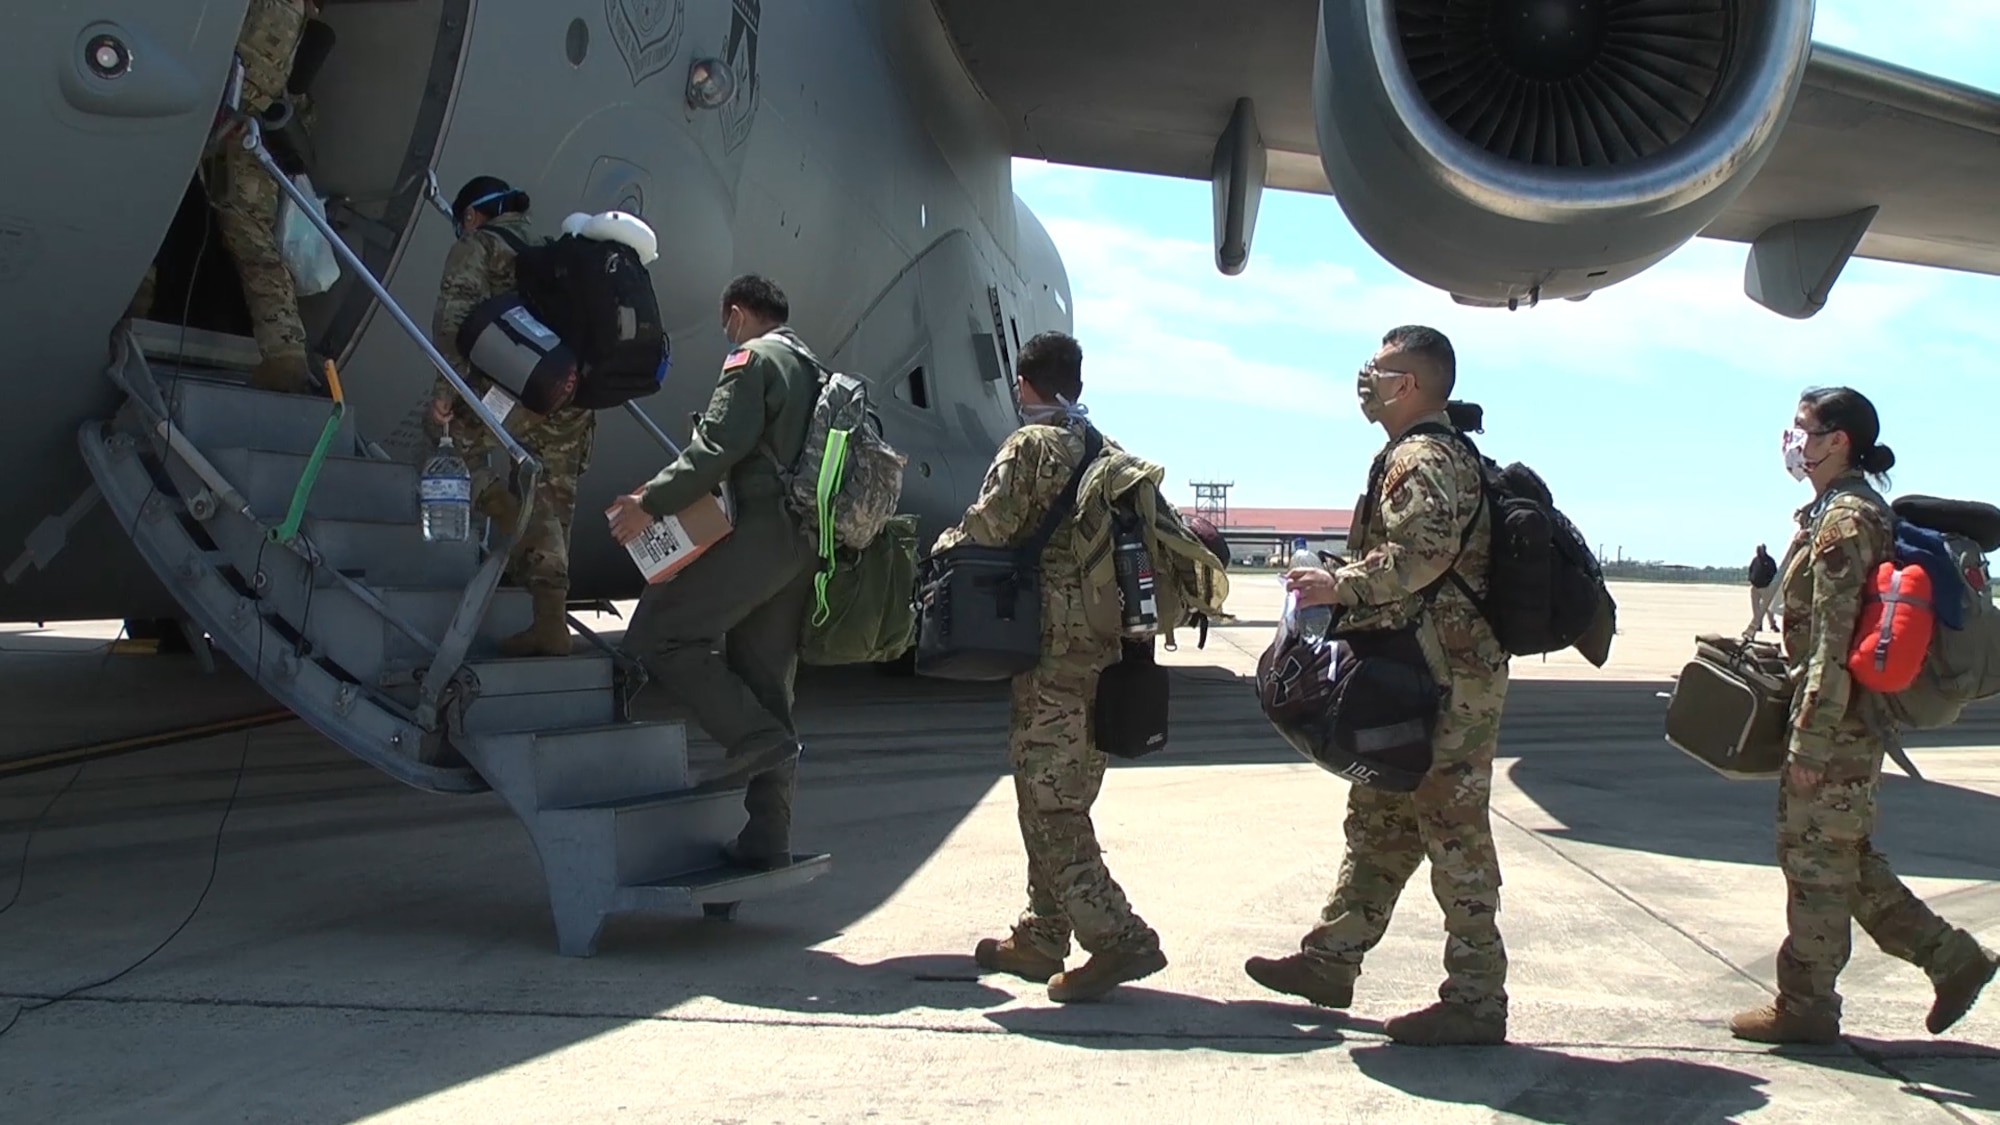 Medical personnel with the 433rd Aeromedical Evacuation Squadron board a C-17 Globemaster III April 15, 2020 at Joint Base San Antonio-Lackland, Texas.